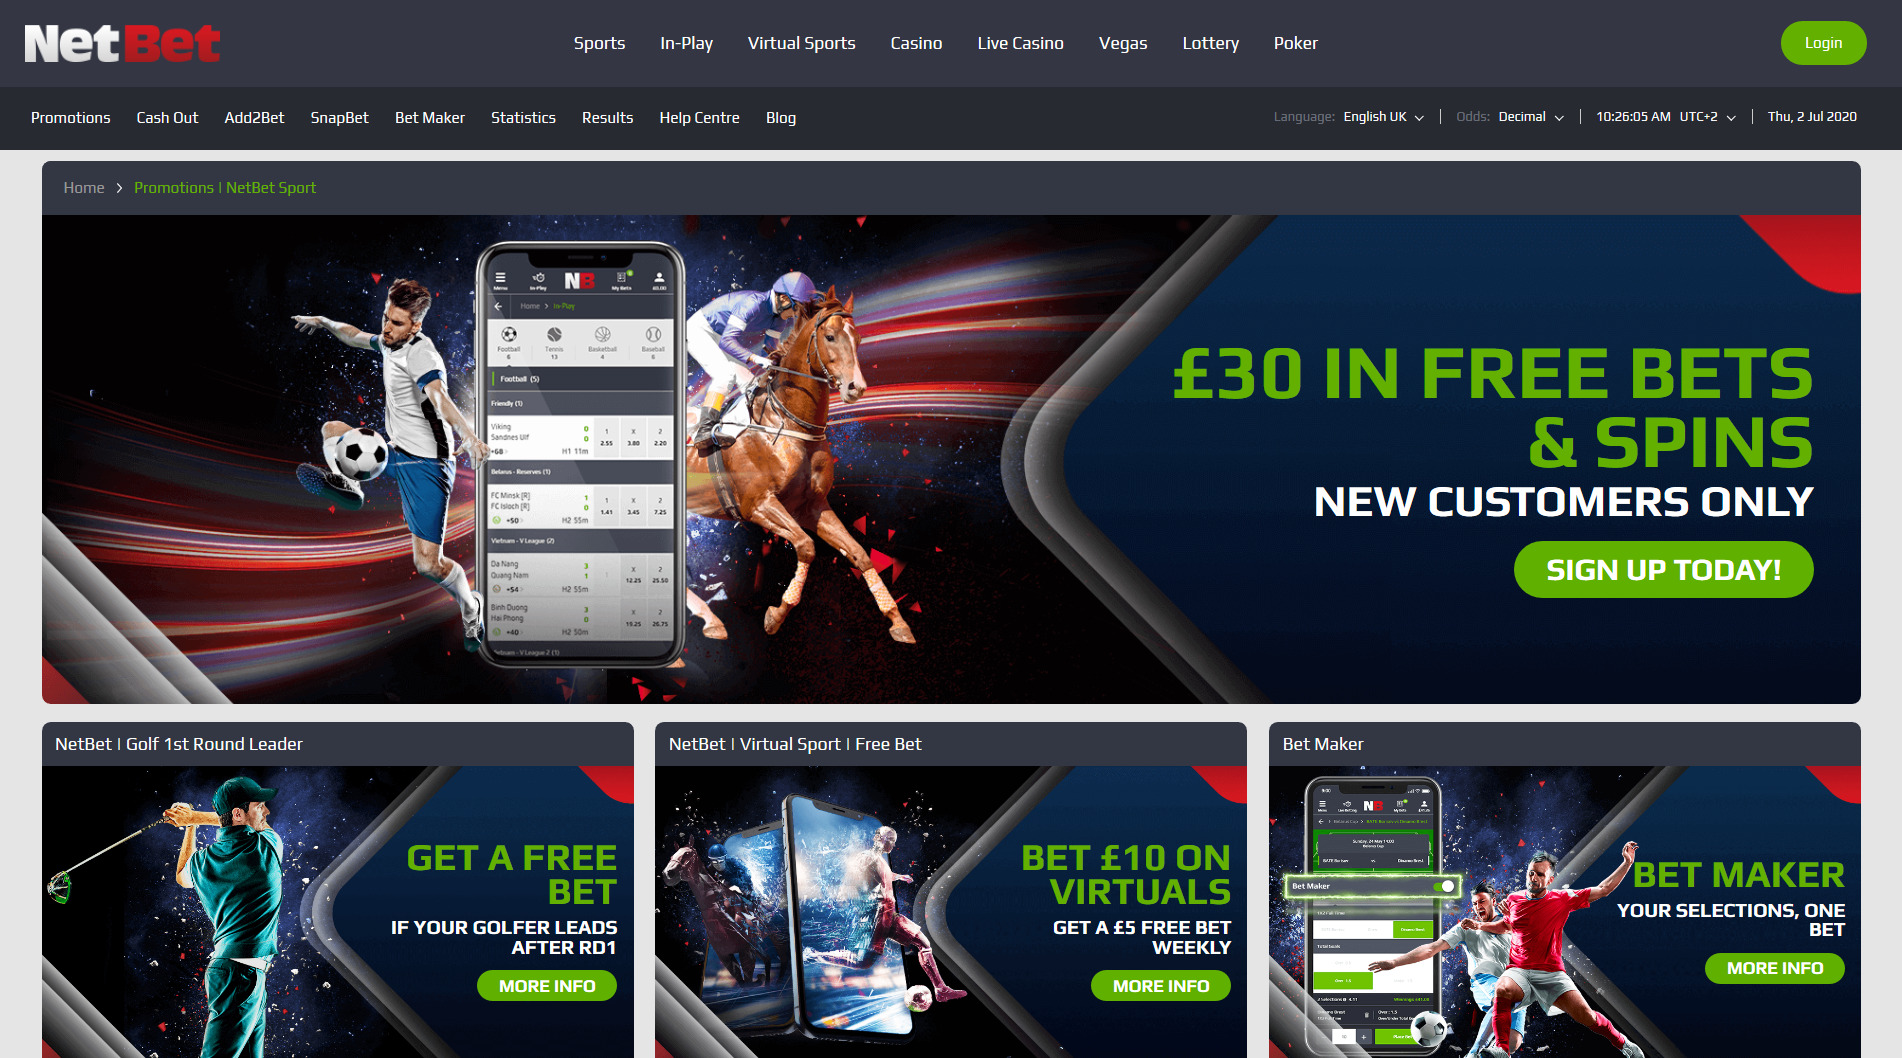 Bookmaker Special Offers